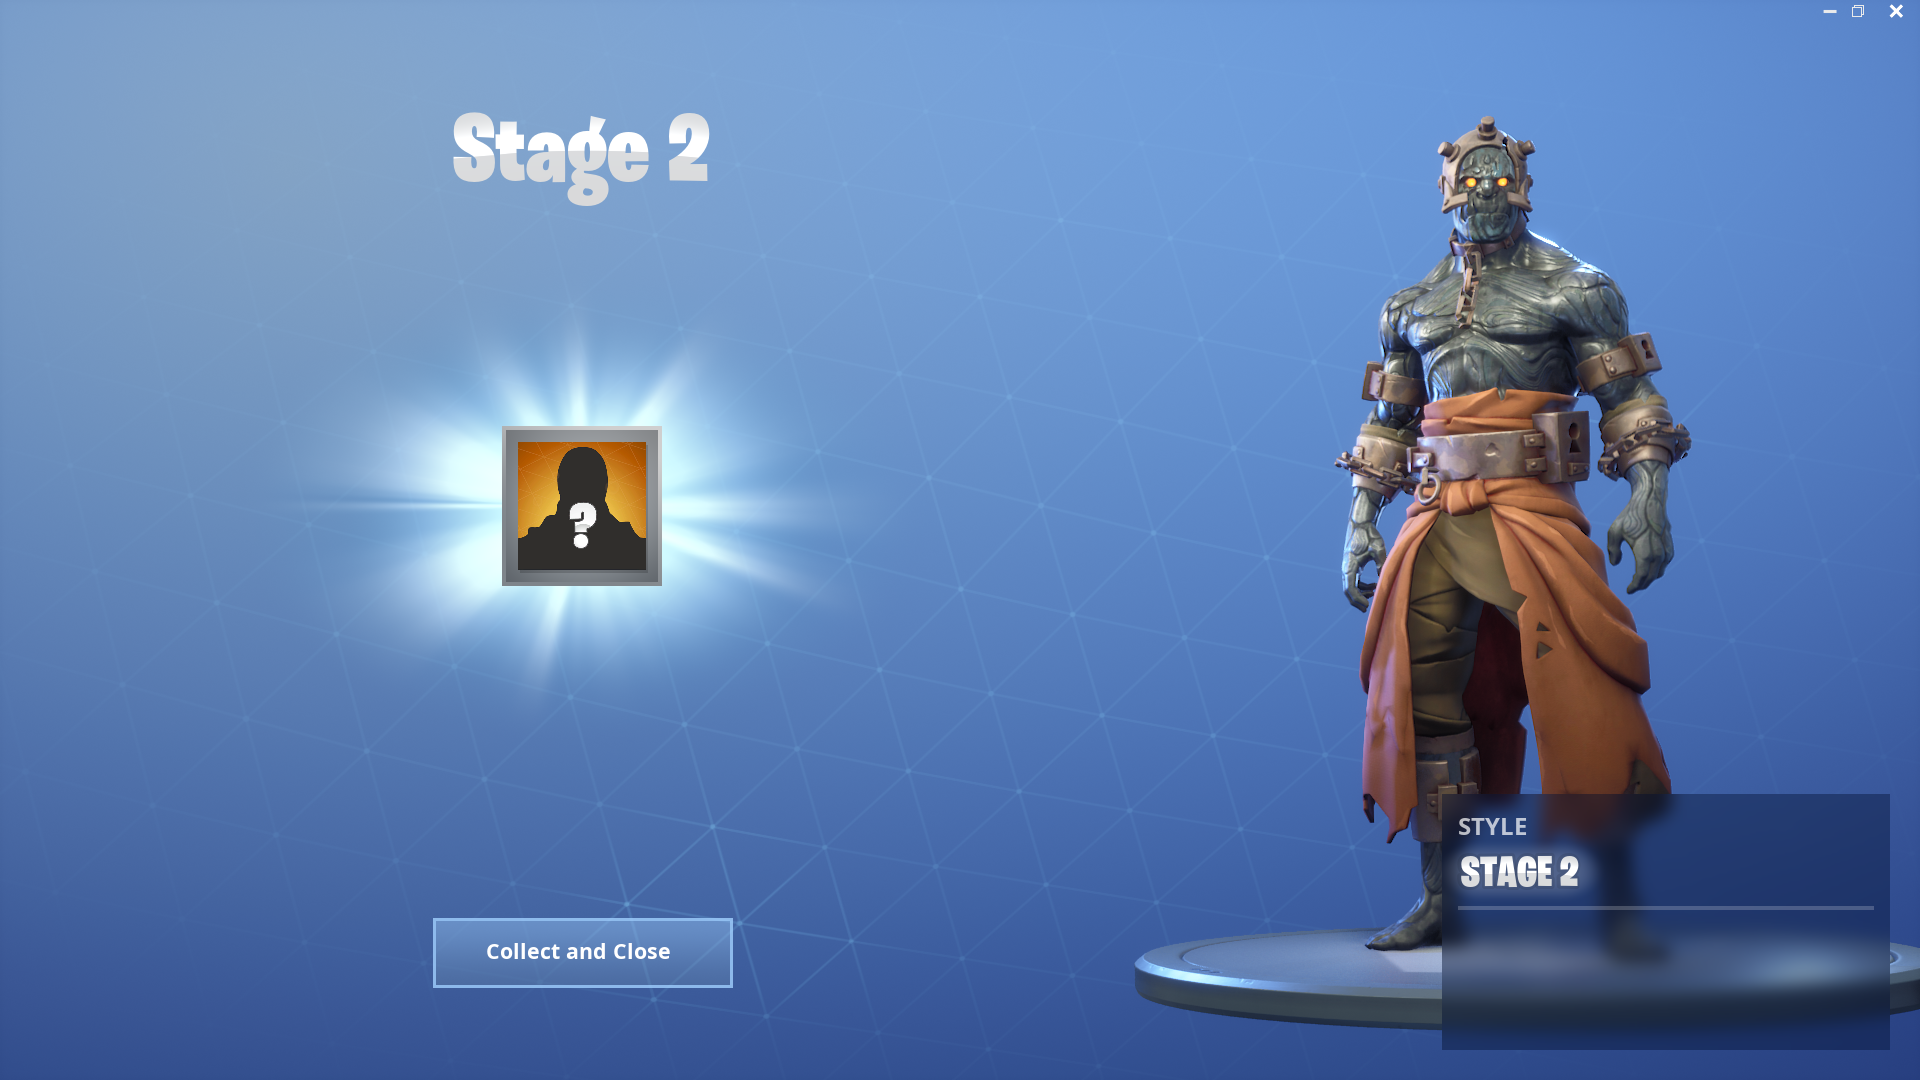 How To Unlock Stage 2 Of The Prisoner Skin In Fortnite Battle Royale - how to unlock stage 2 of the prisoner skin in fortnite